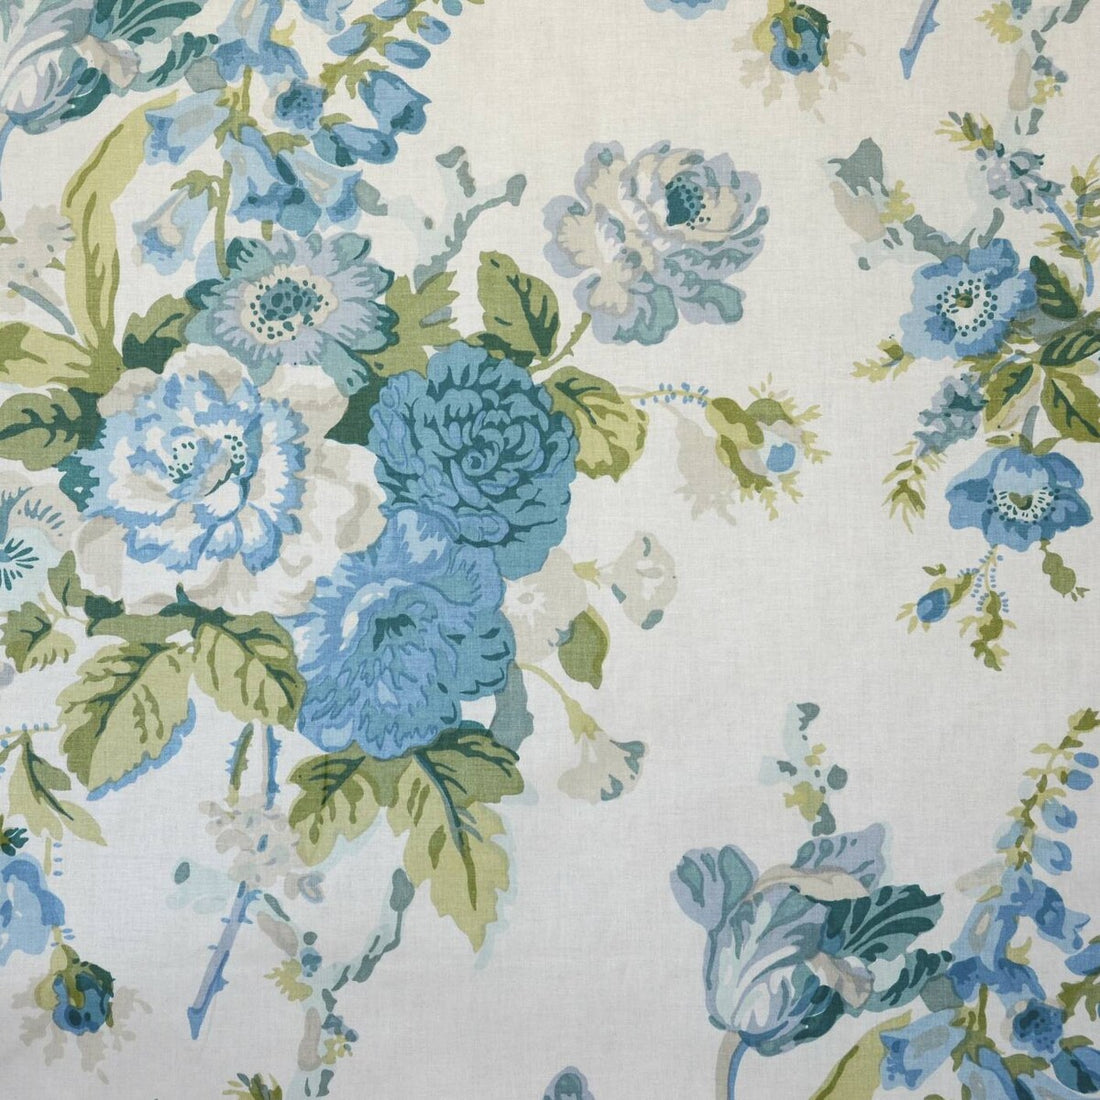 Grenville Glazed Chintz fabric in blue/green color - pattern BFC-3690.53.0 - by Lee Jofa in the Blithfield collection